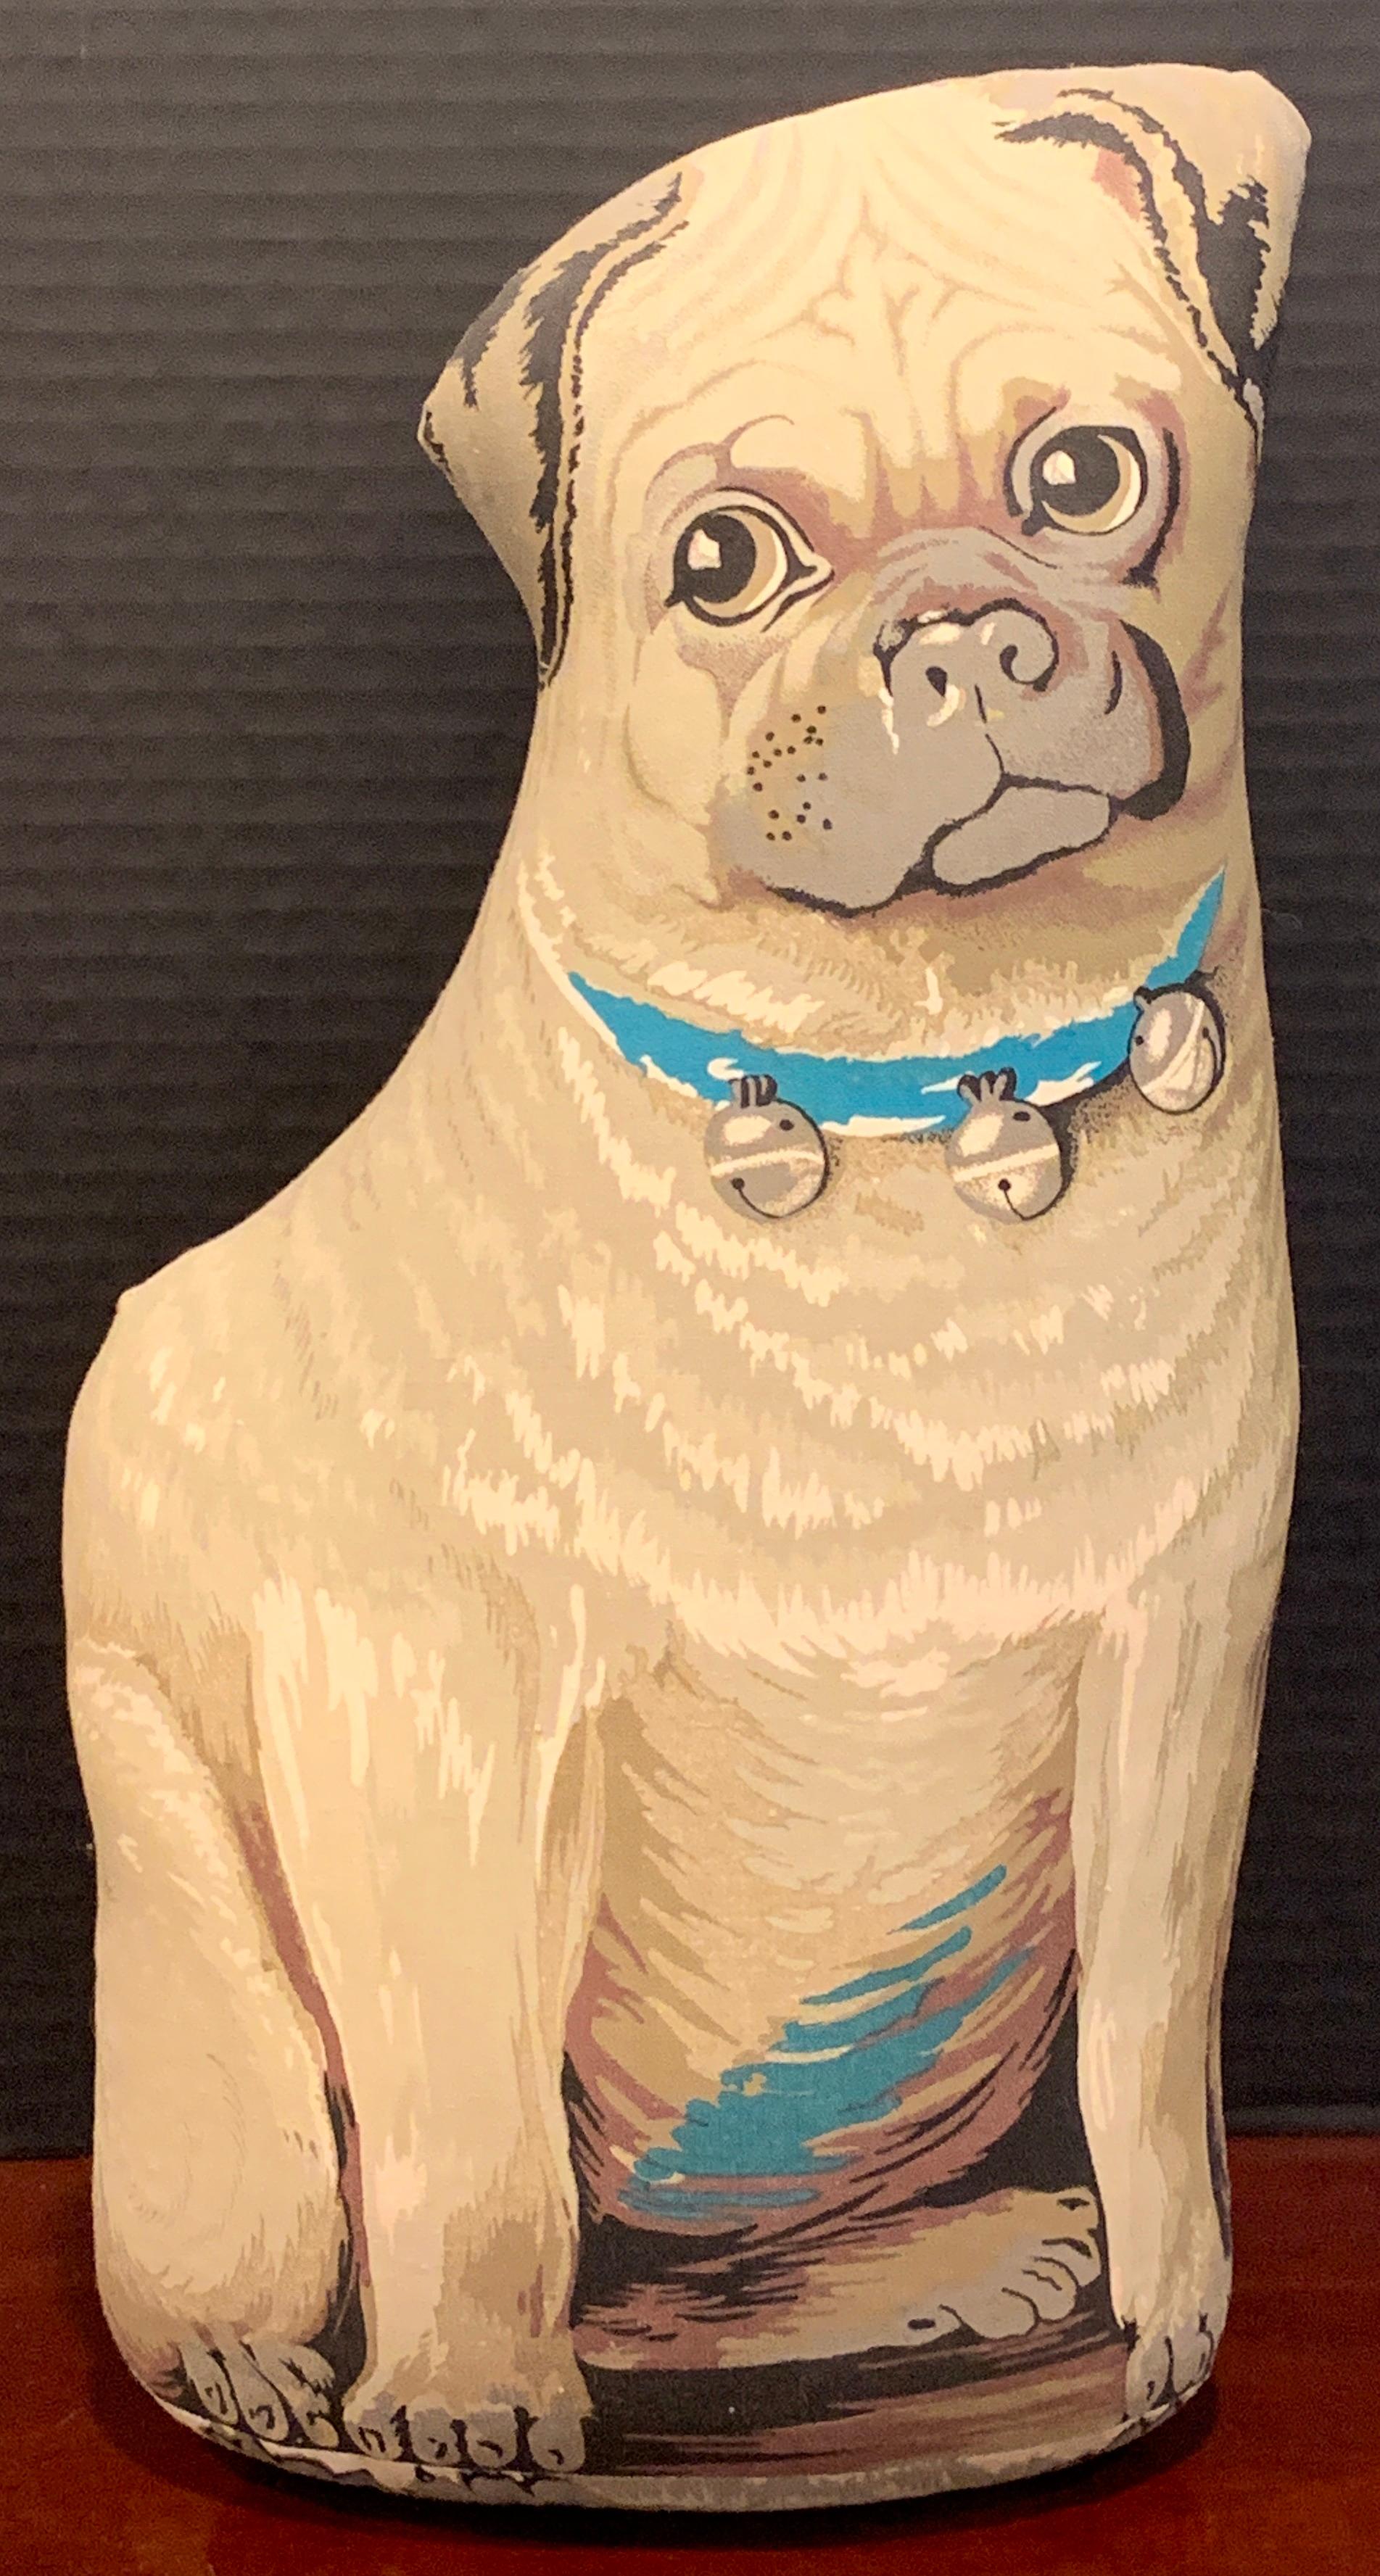 Vintage Toyworks pug pillow
Similar to the ones we sold from the estate of the Duke and Duchess of Windsor Sotheby's 1997.
This pillow is not from the Duke and Duchess of Windsor collection.